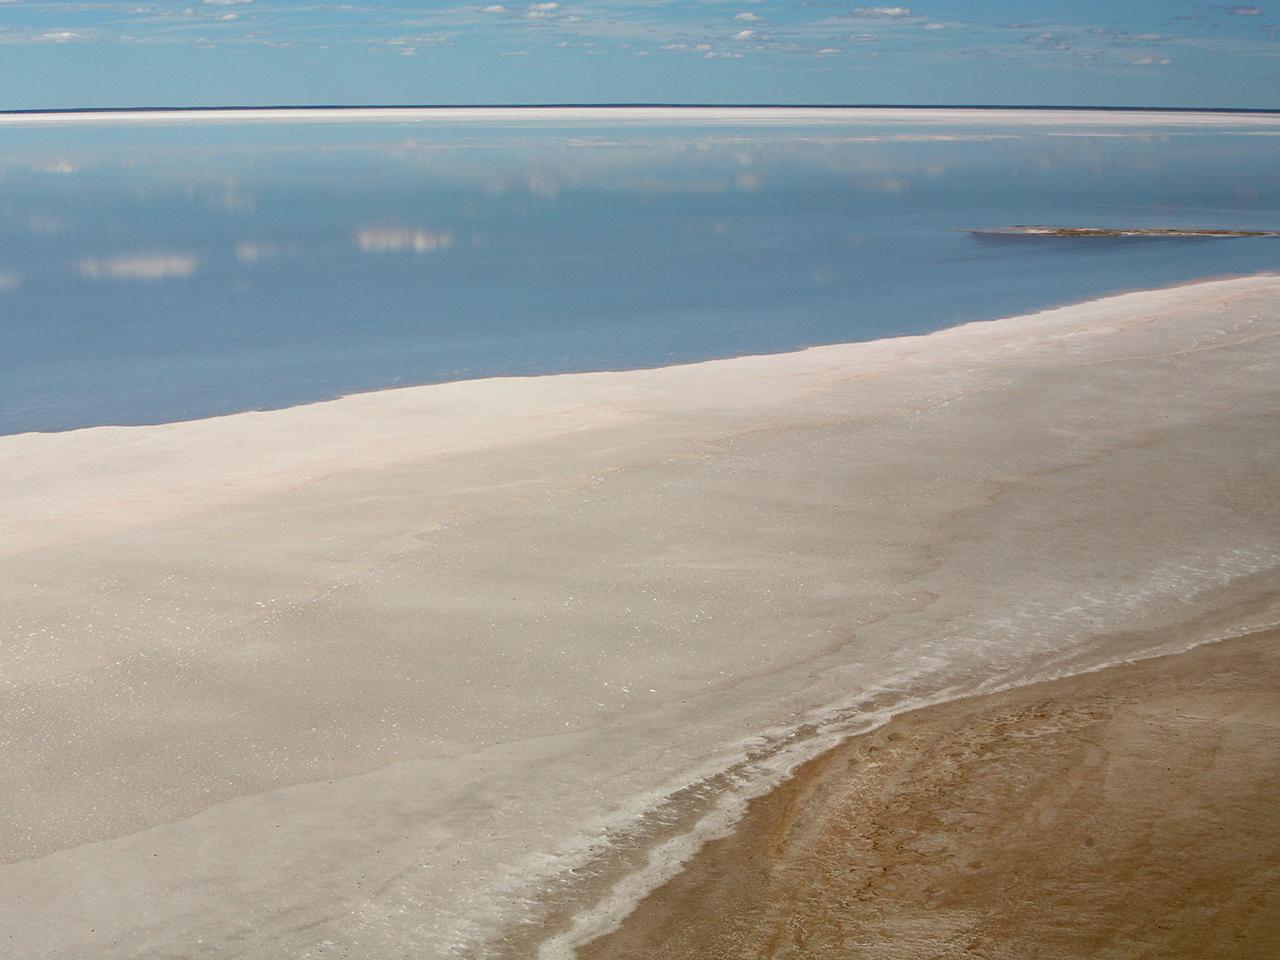 Lake Eyre with water taken from helicopter